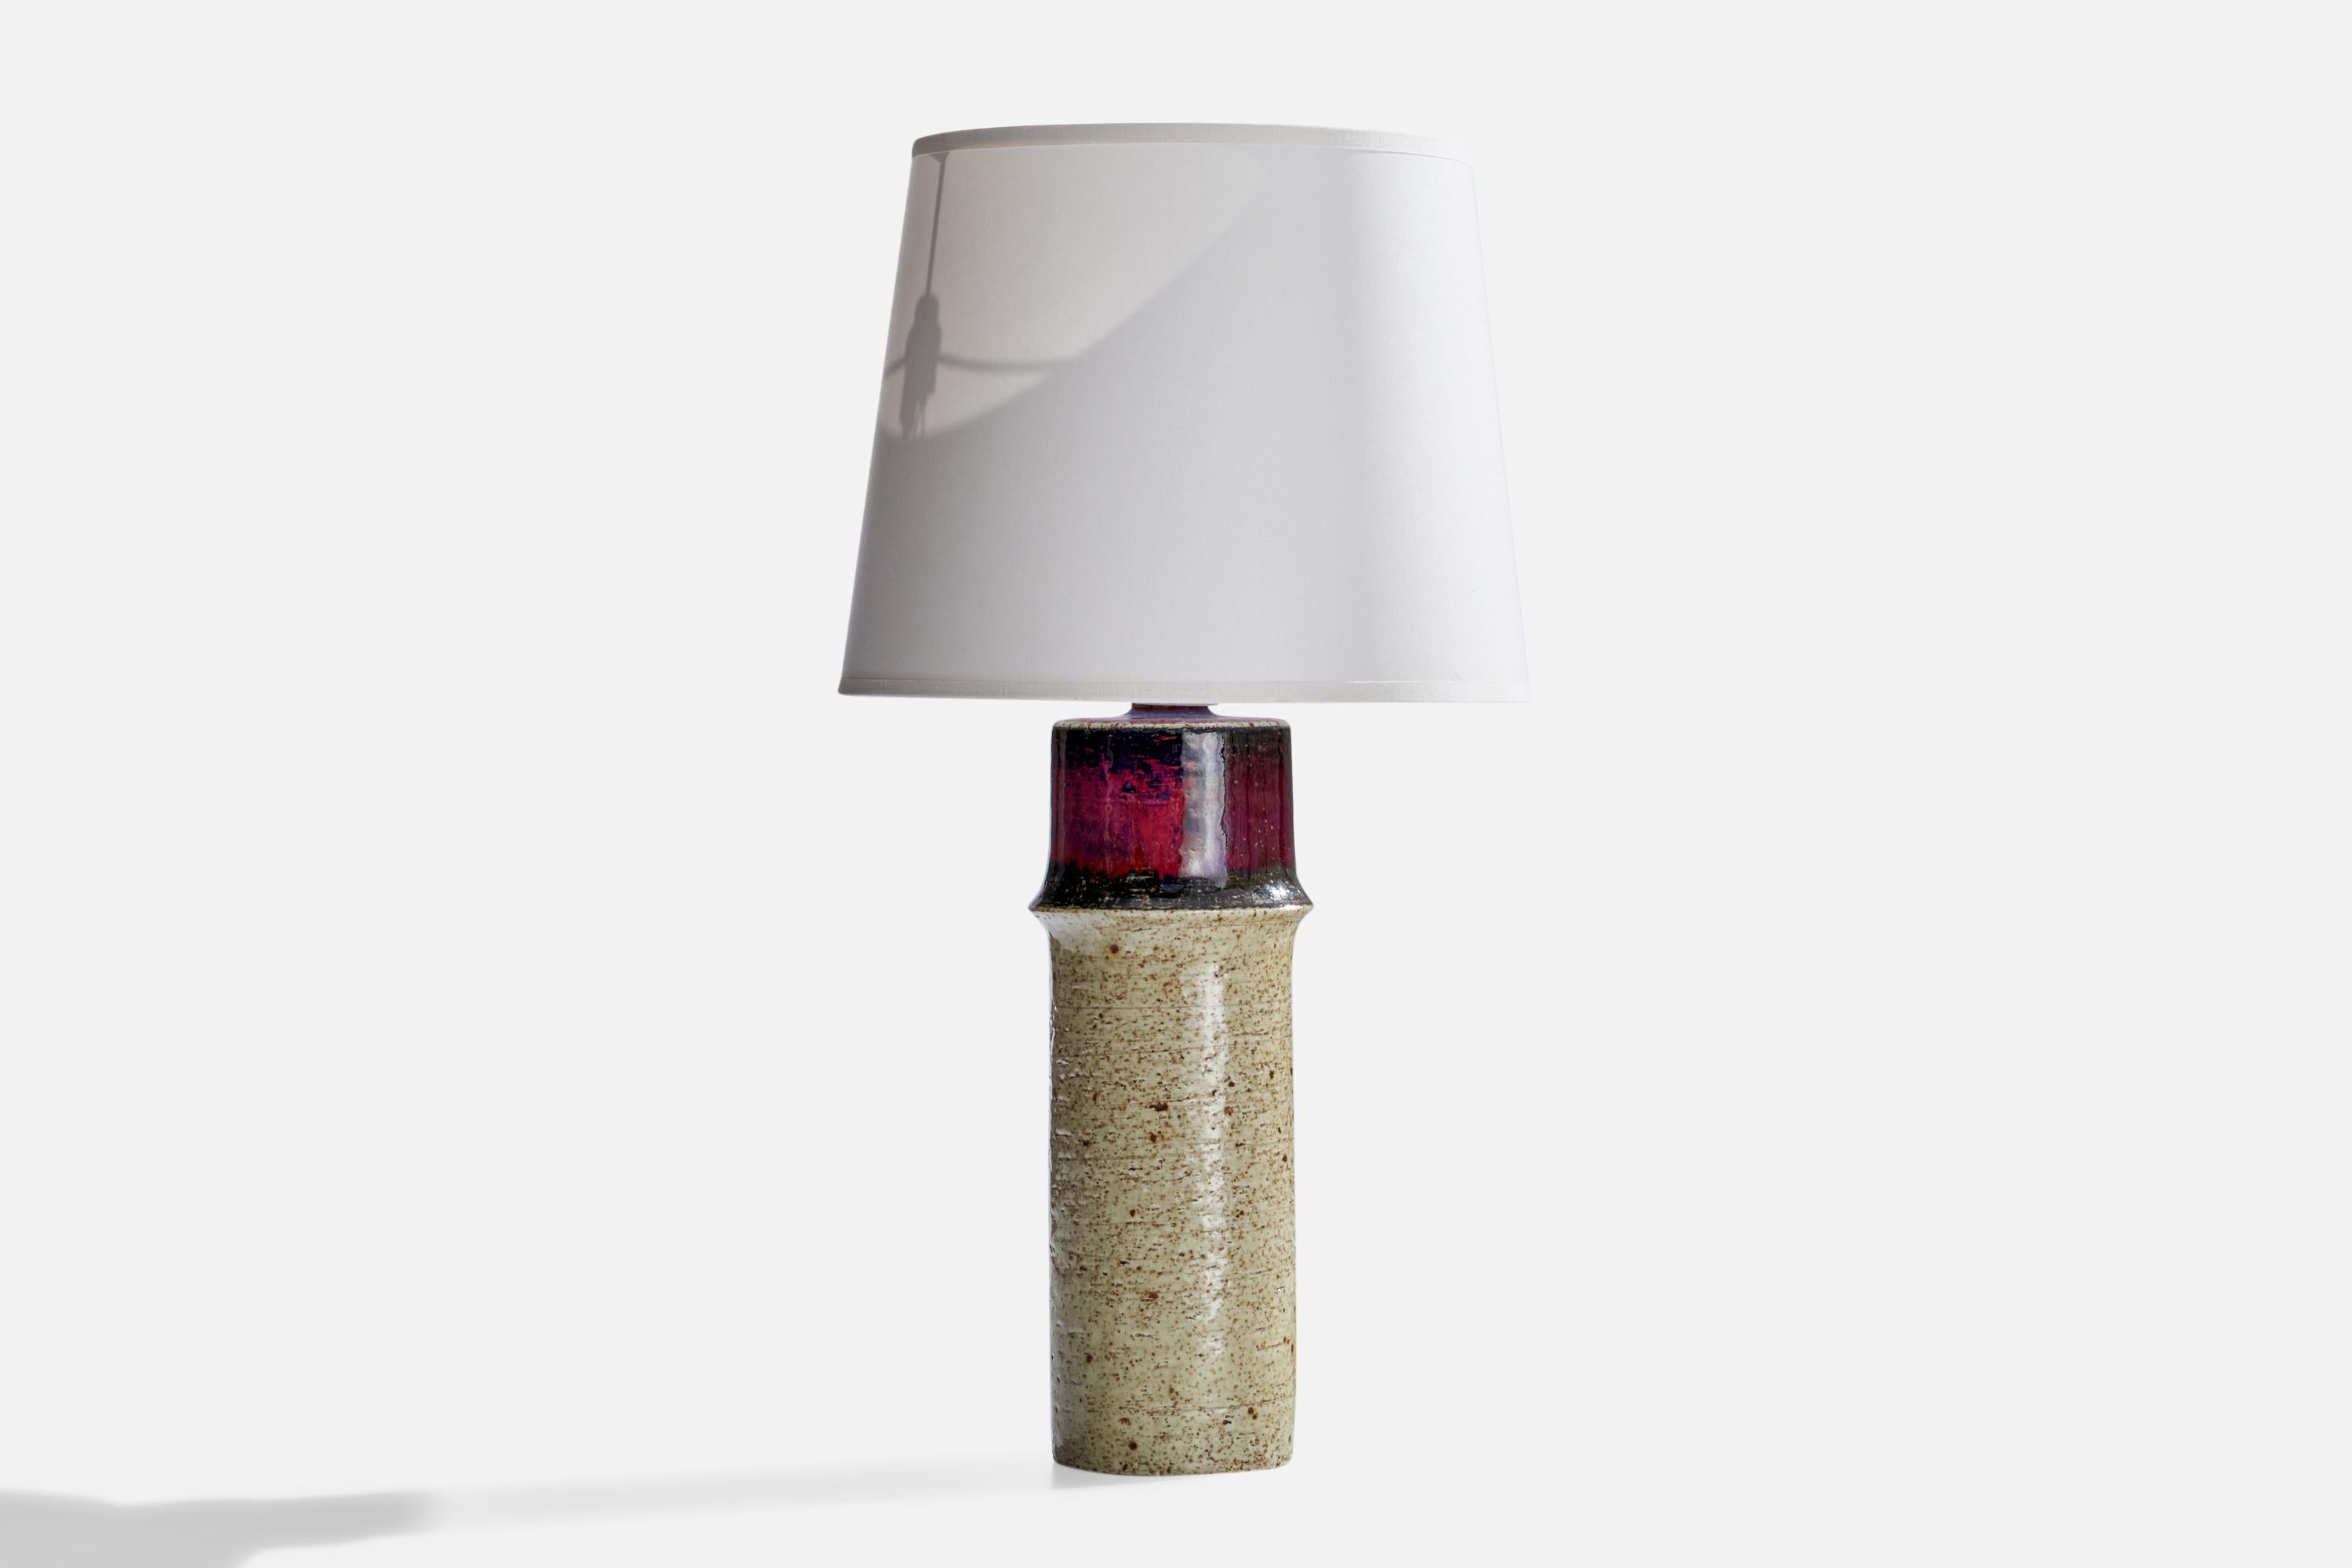 A grey and purple-glazed stoneware table lamp designed by Sylvia Leuchovius and produced by Rörstrand, Sweden, 1960s.

Dimensions of Lamp (inches): 13.25” H x 3.75”  Diameter
Dimensions of Shade (inches): 8” Top Diameter x 10” Bottom Diameter x